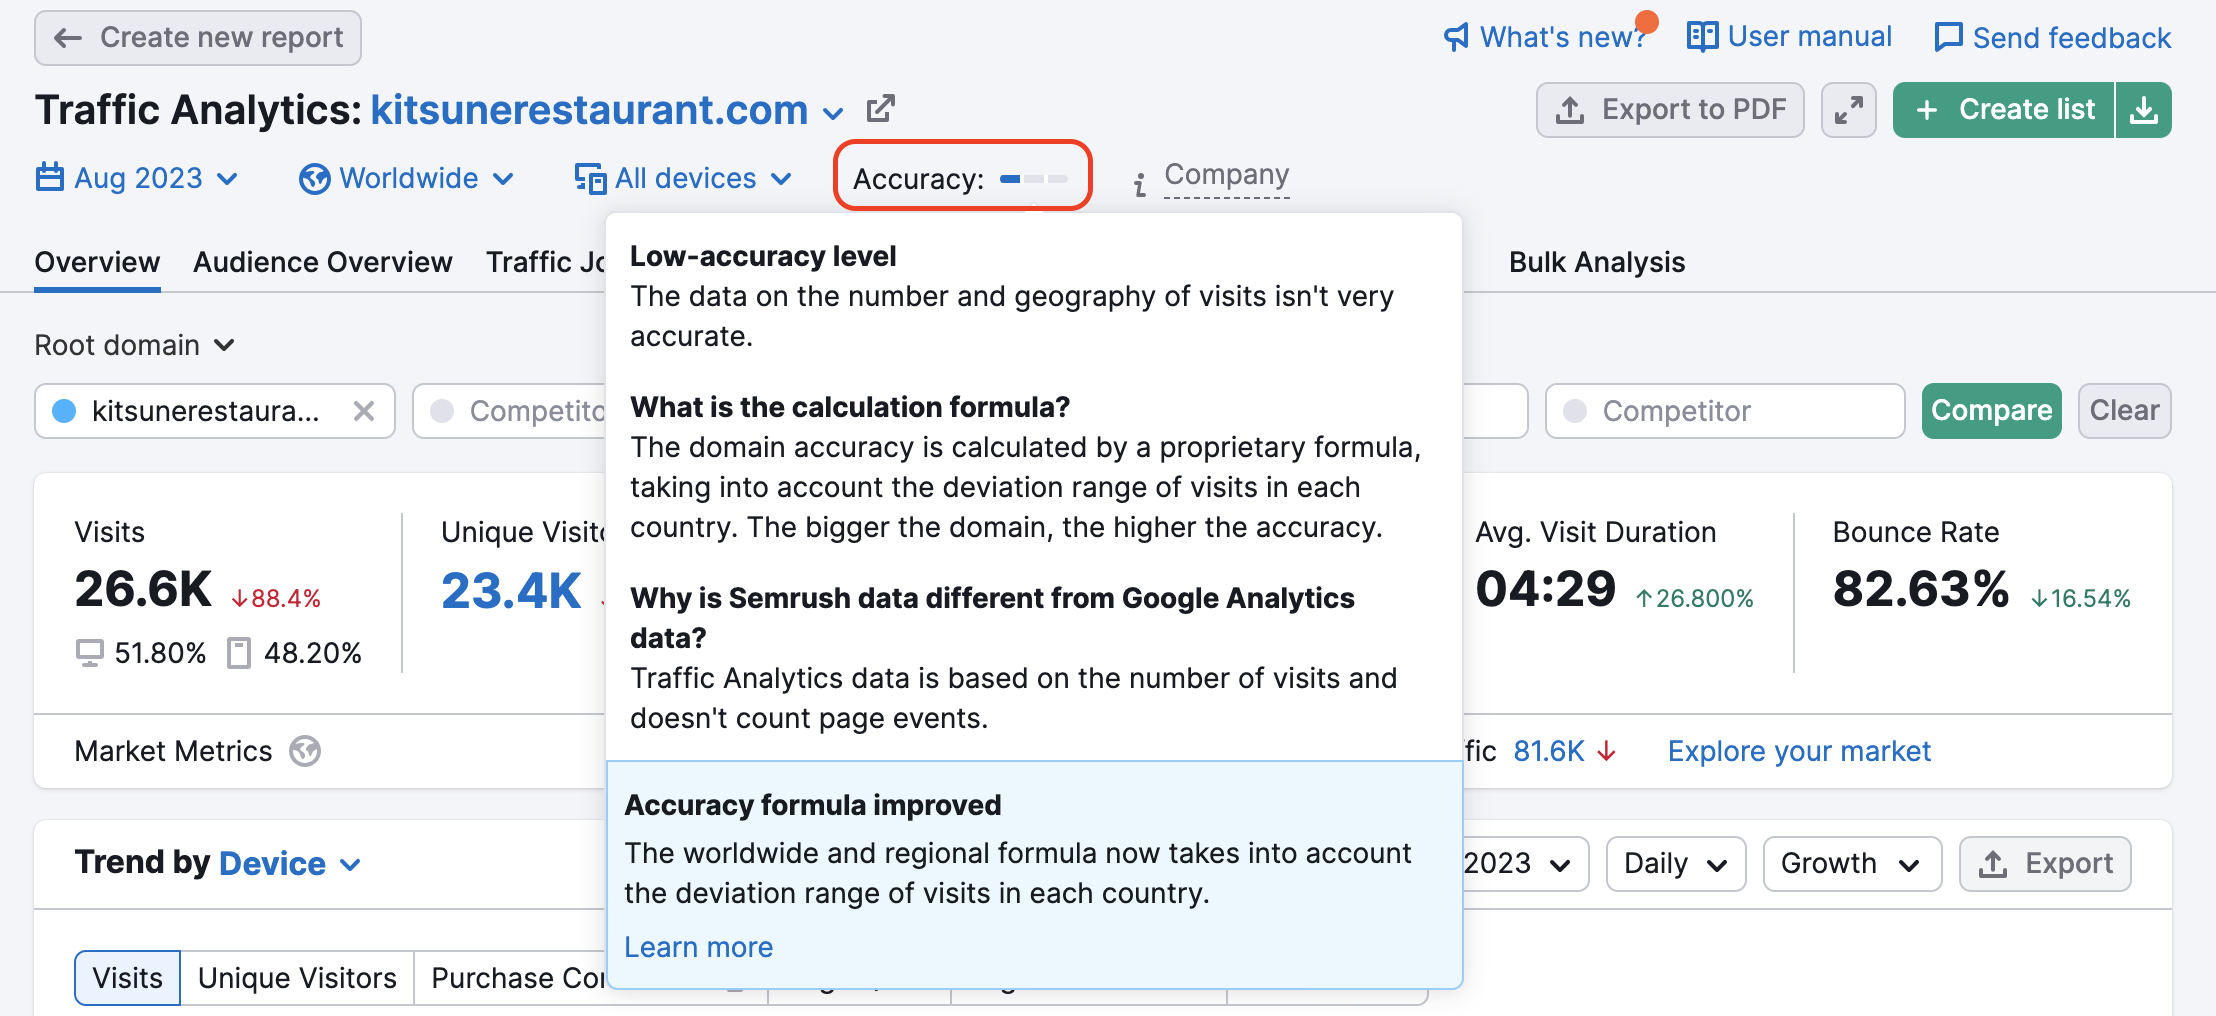 An example of a Traffic Analytics report with low accuracy metrics. The Accuracy bar is highlighted and a tooltip below provides additional insight on how accuracy levels work.